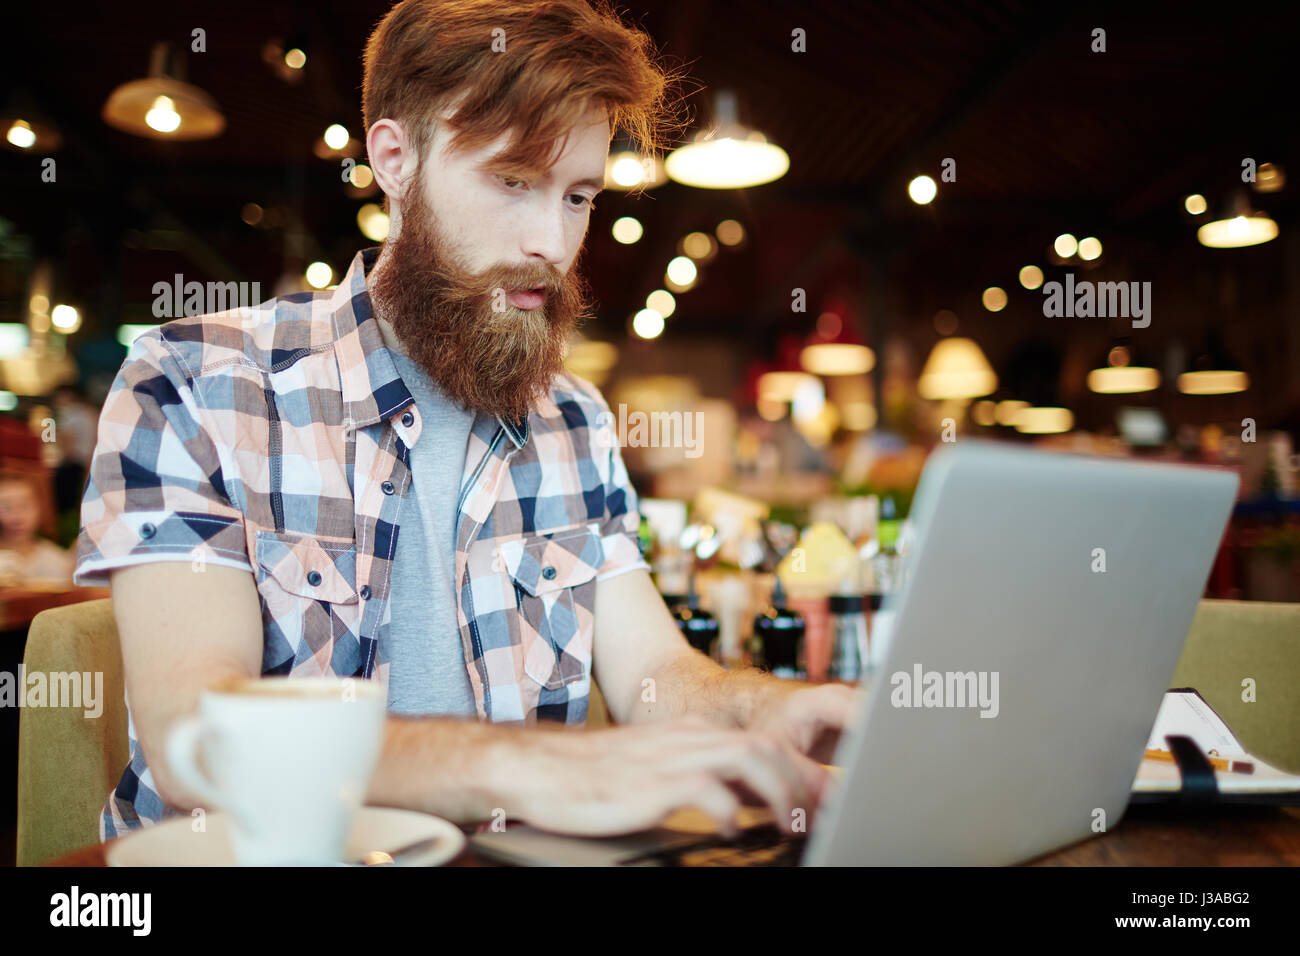 Preparing Financial Report in Cyber Cafe Stock Photo